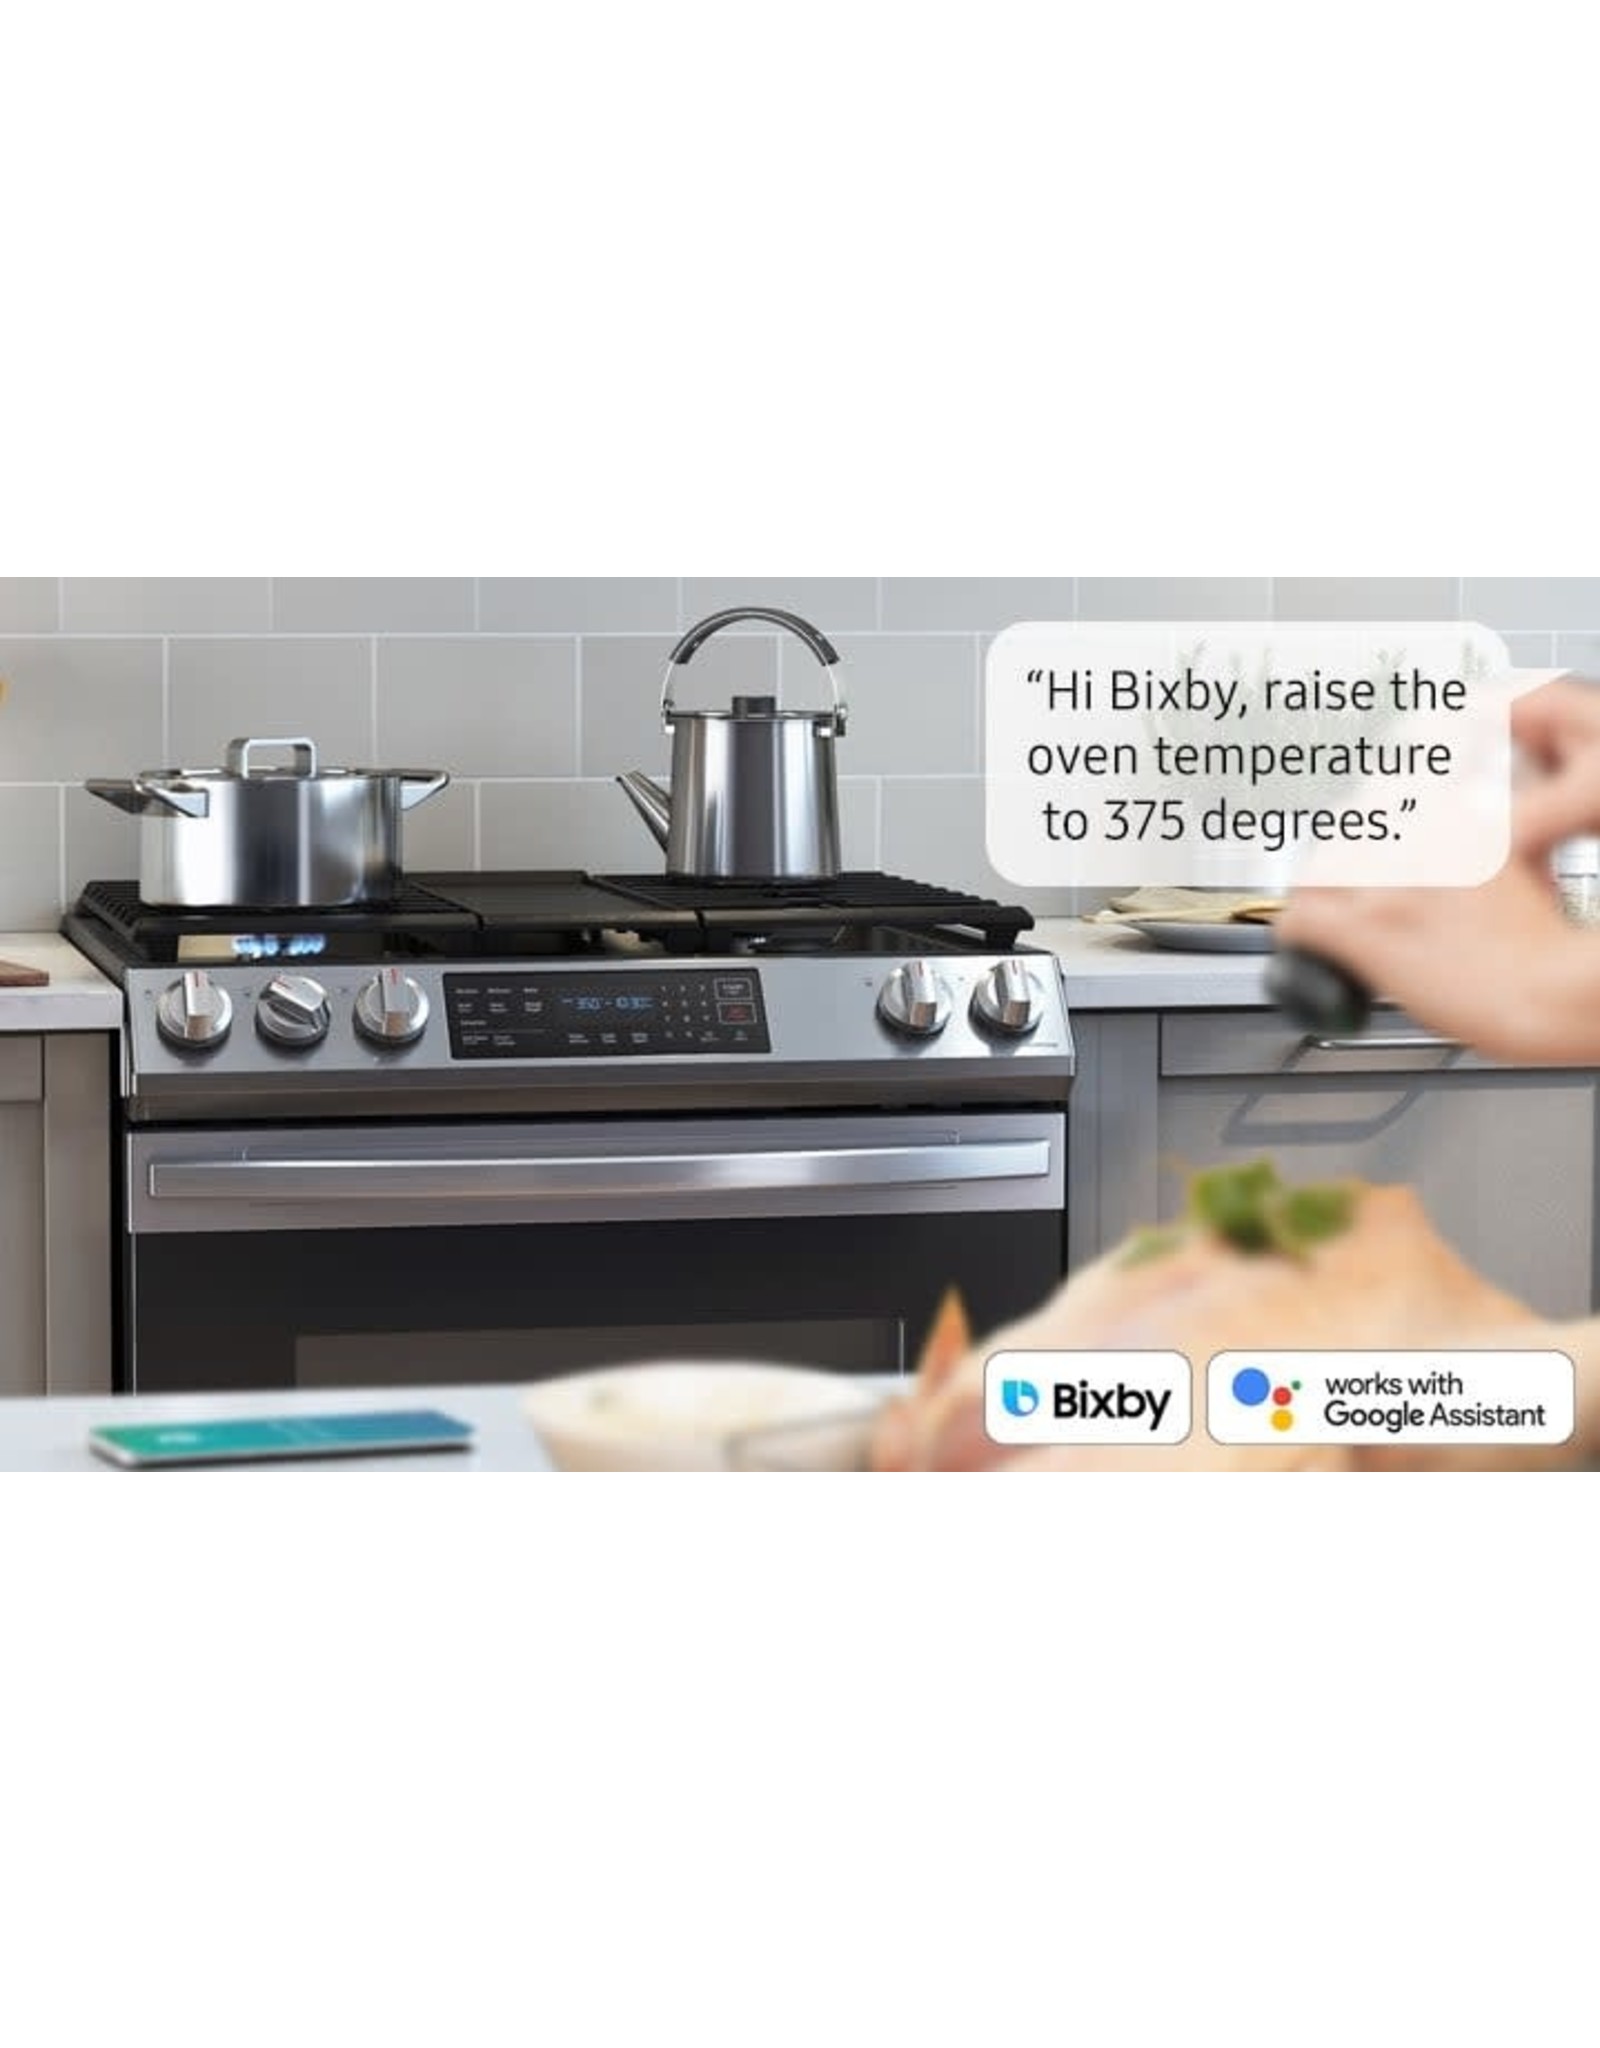 SAMSUNG broken glass 30 in. 6.0 cu. ft. Slide-In Gas Range with Self-Cleaning Oven in Stainless Steel